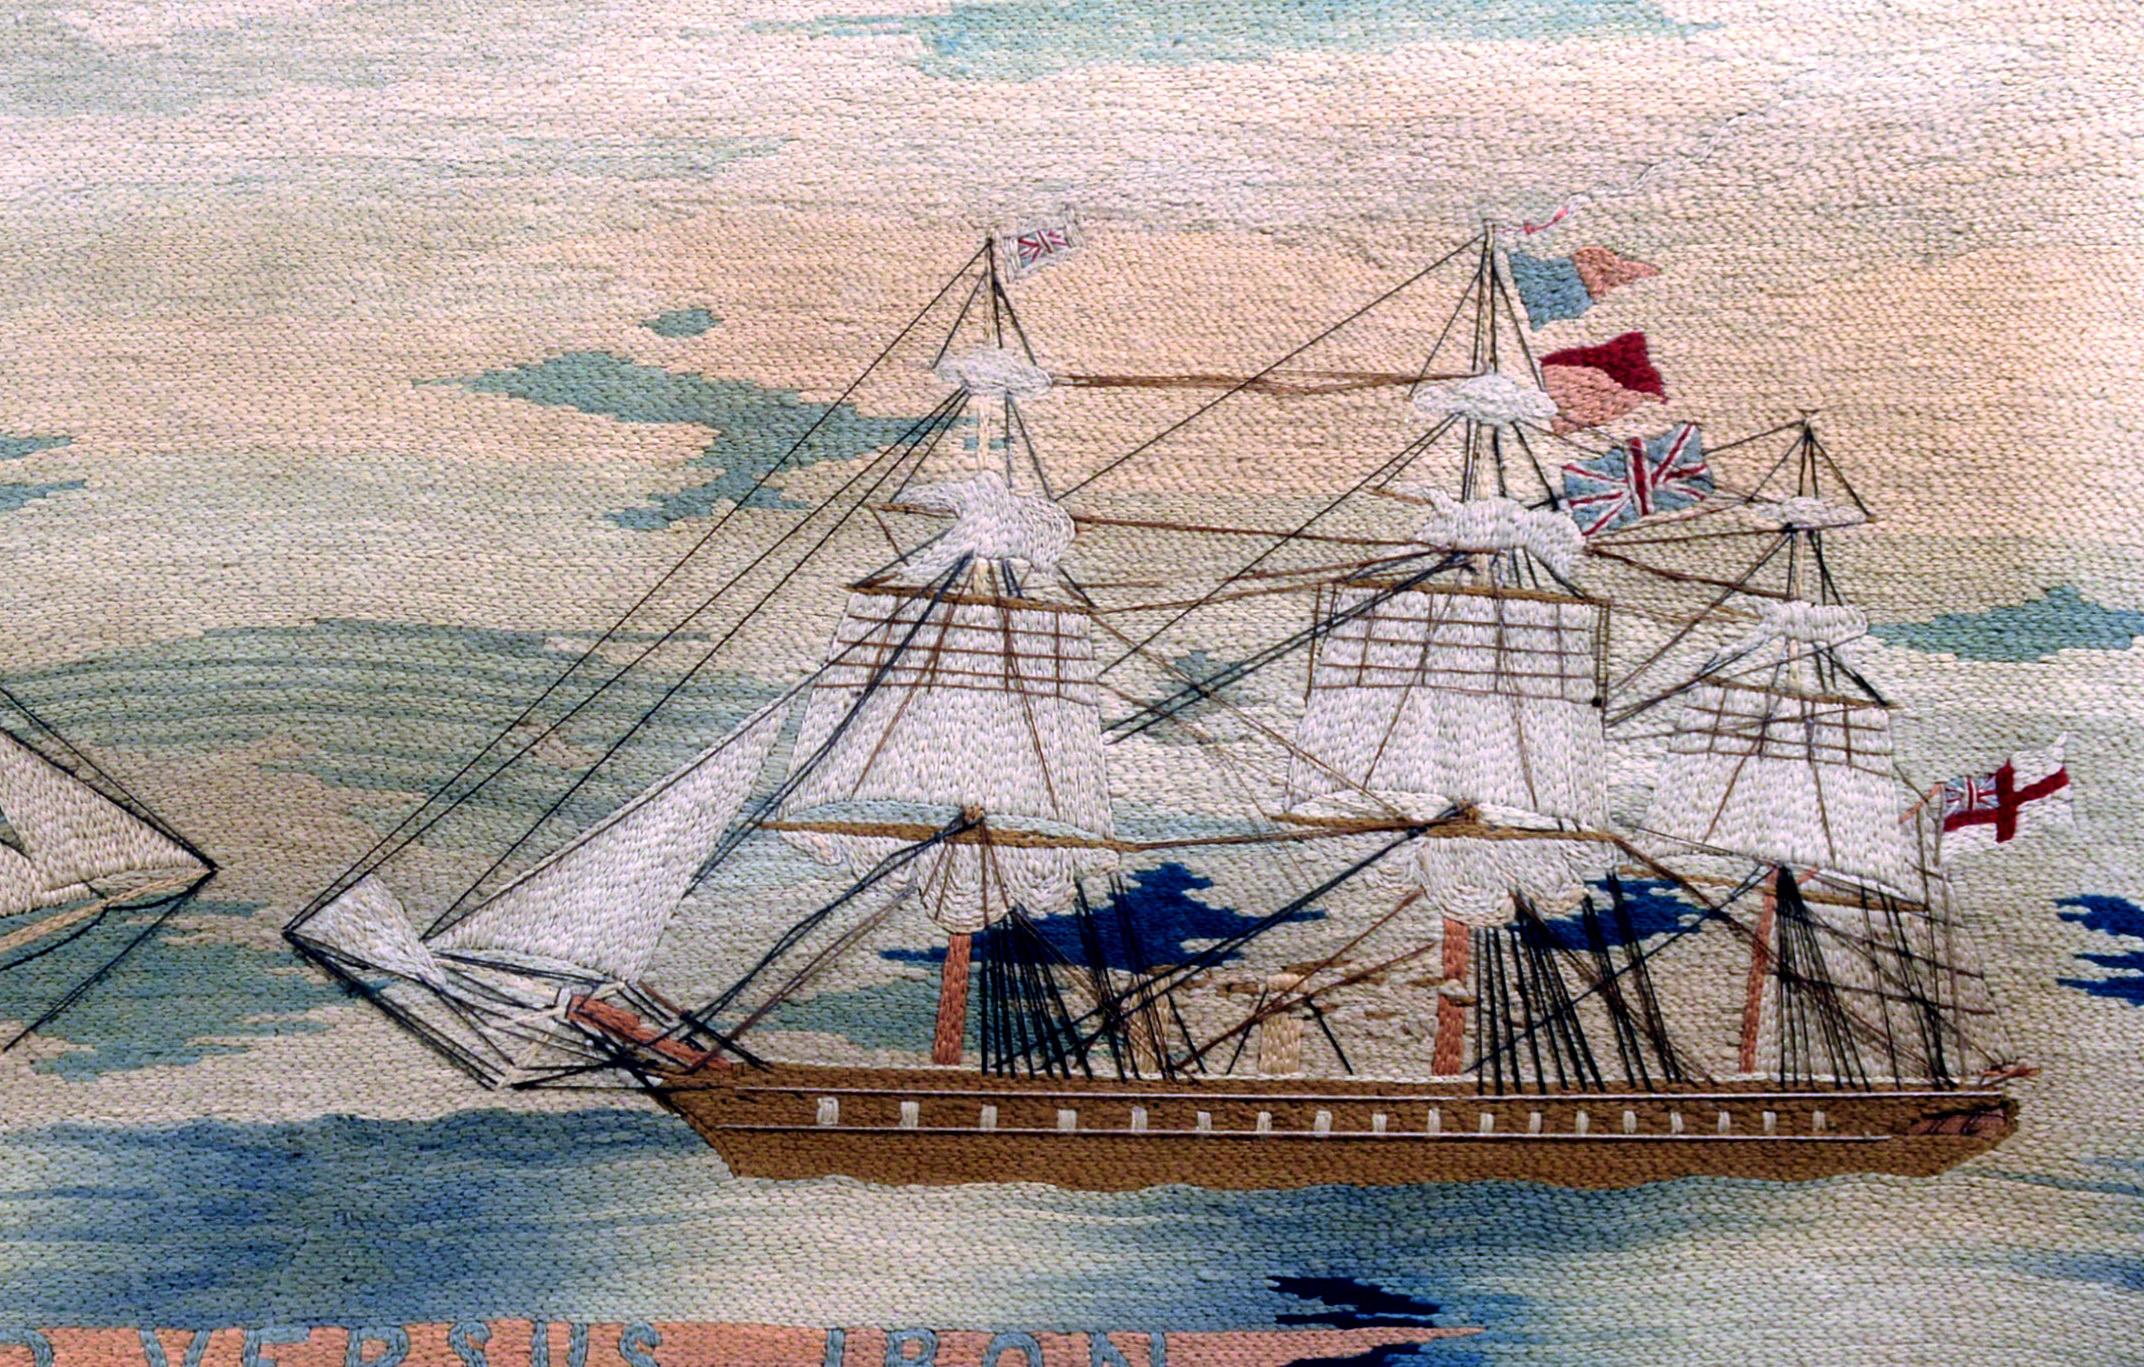 Unusual Sailor's Woolwork (Woolie) of Two Royal Navy Ships,
Titled 